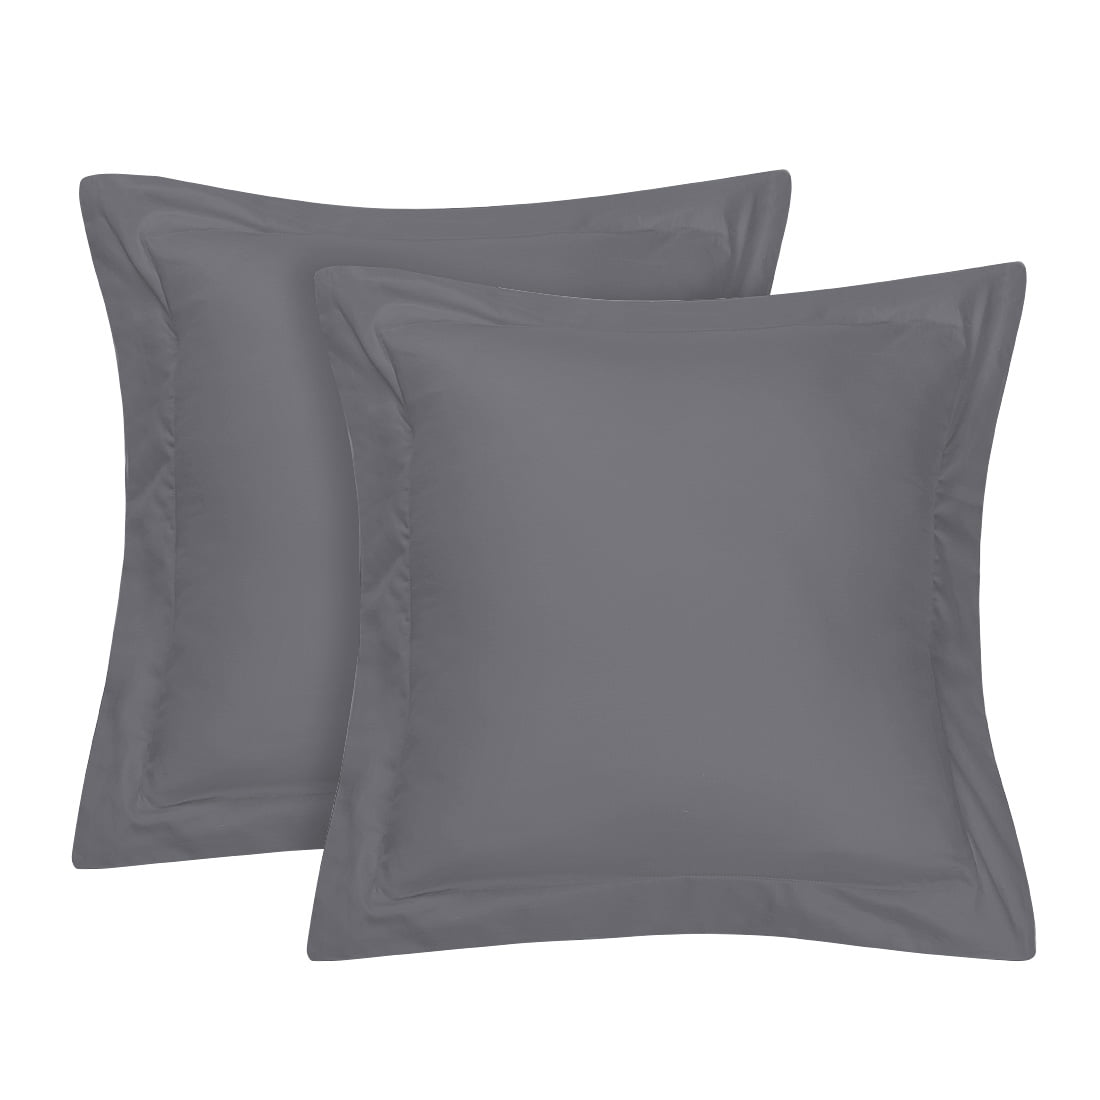 European Square Pillow Shams 26x26 Inch Black Set of 2 Decorative European Pillow Shams Cushion Cover with 2 Inch Flange 100% Egyptian Cotton 600 Thread Count Pillow Cover Euro Shams 26x26 Black